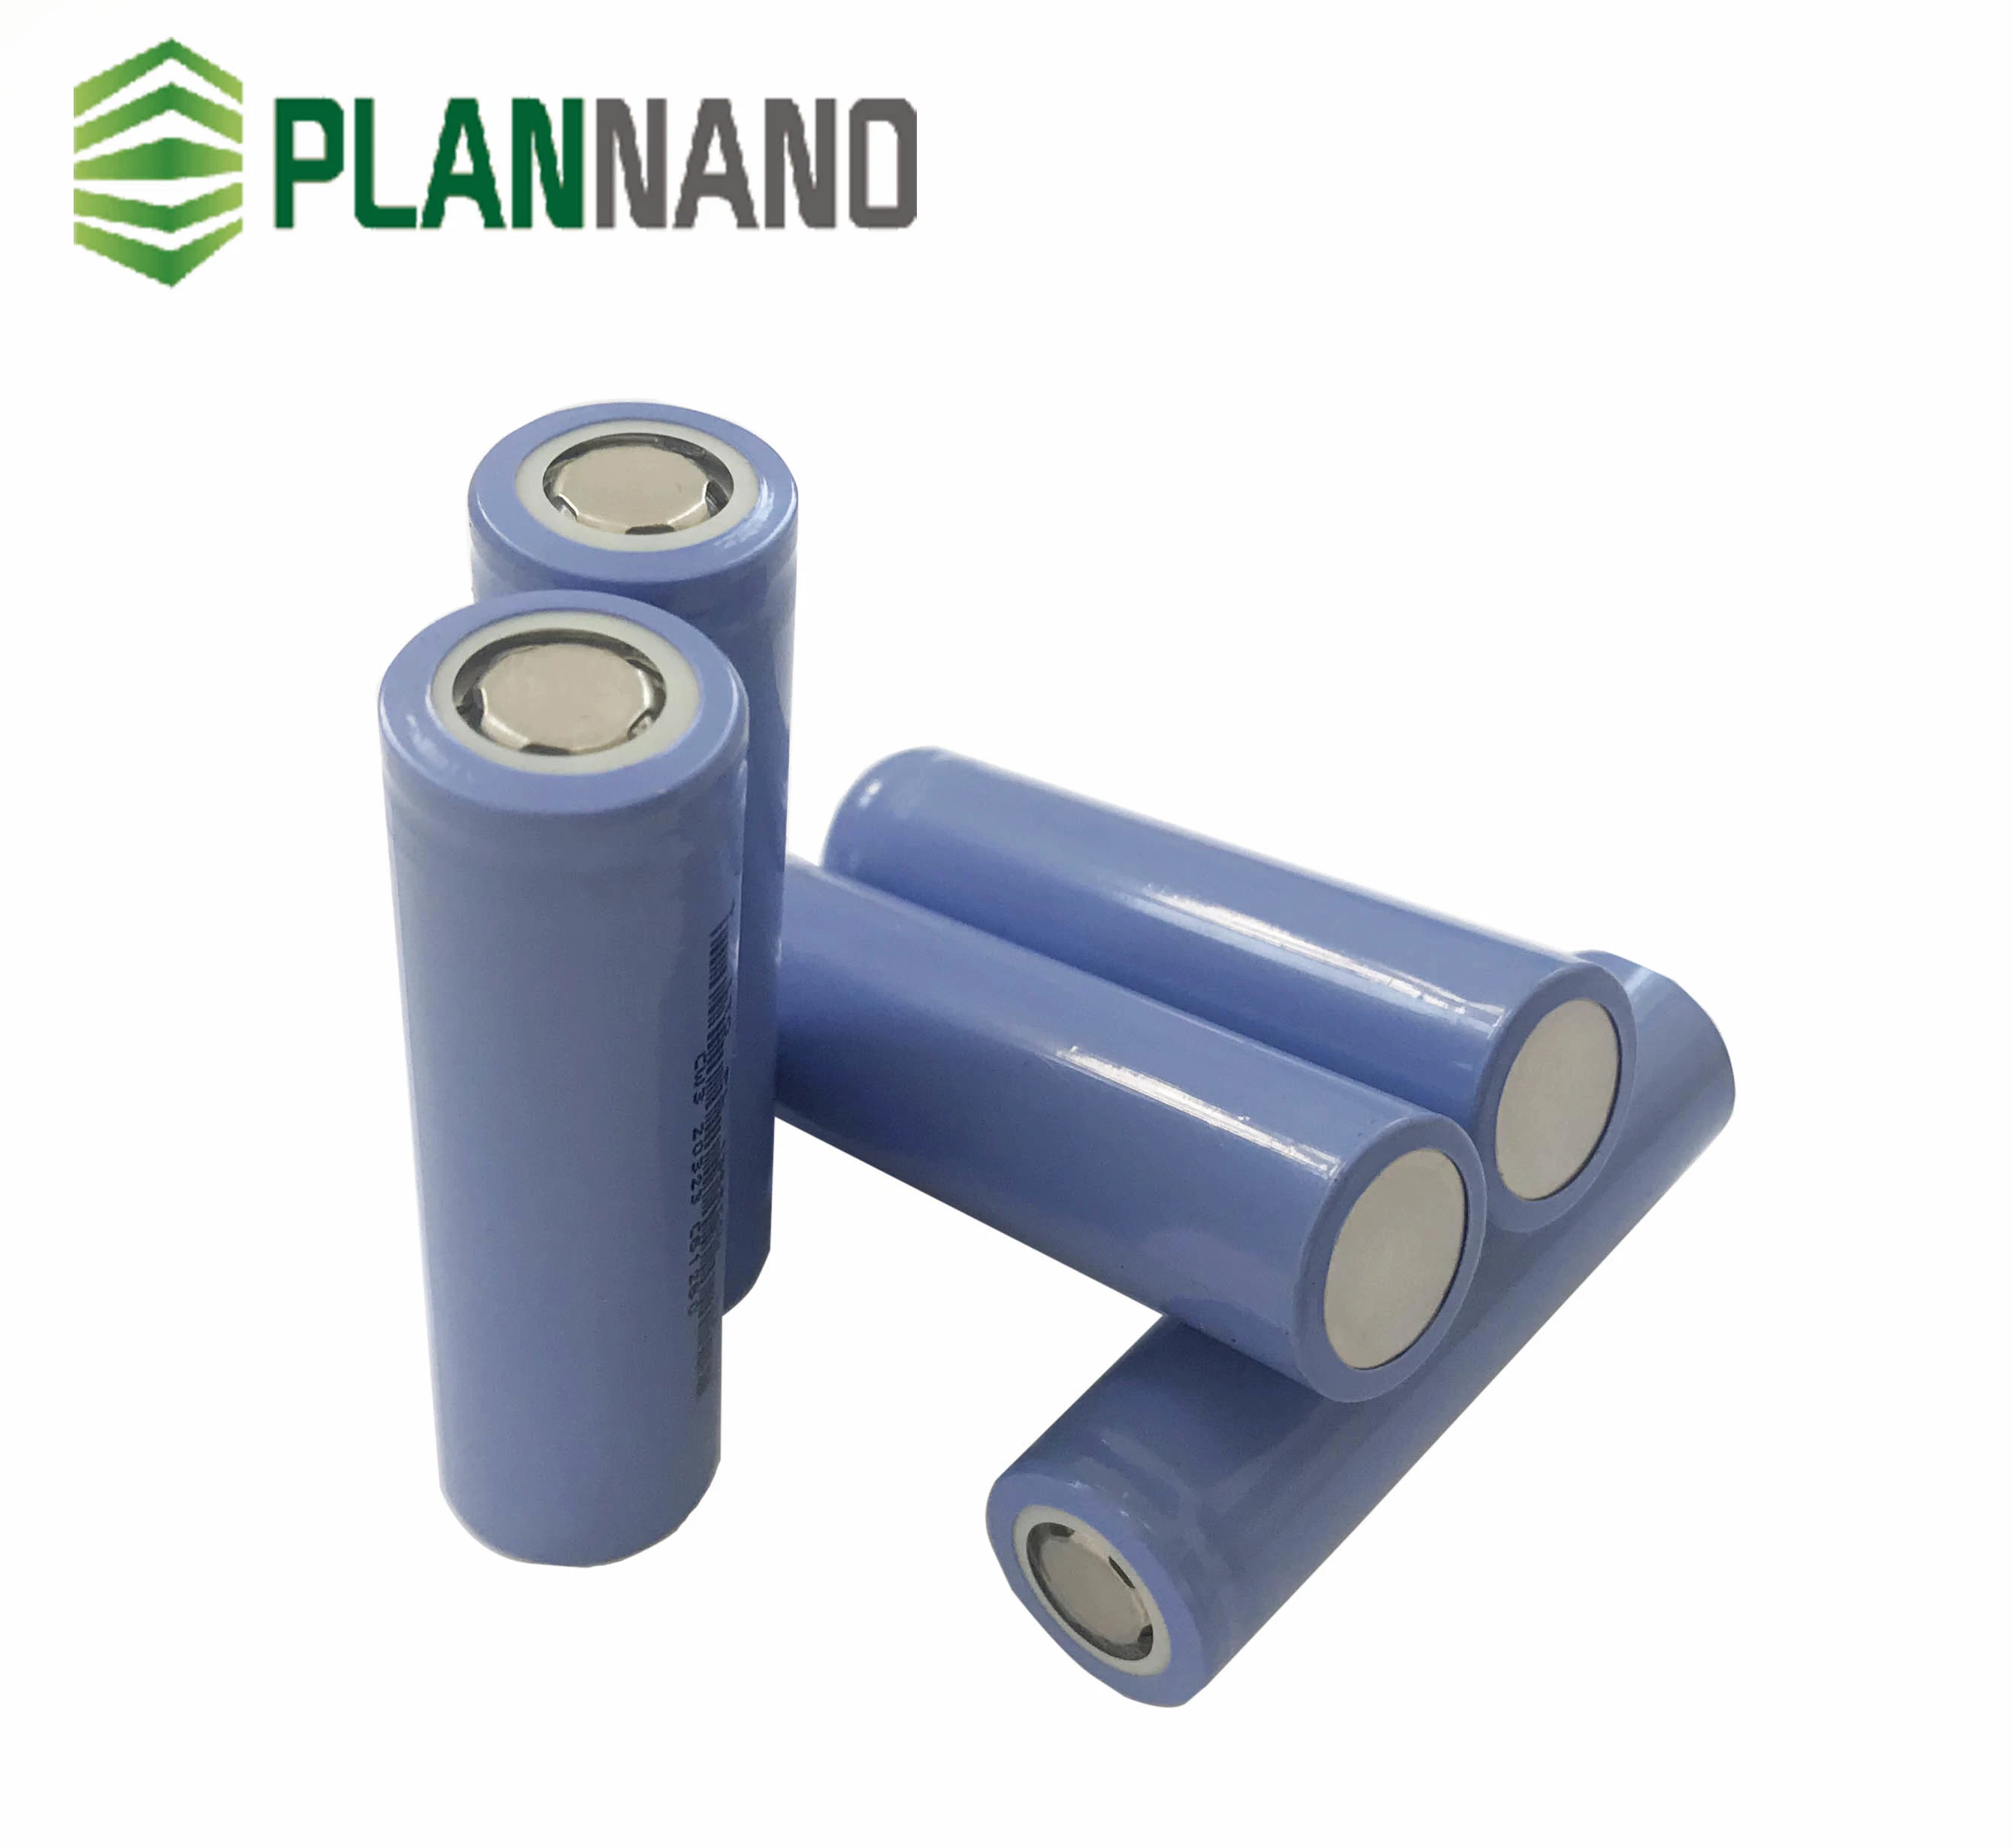 Factory Price Rechargeable 18650 Lithium Titanate Plannano 2.4V 1500mAh Battery Pack Power Tools